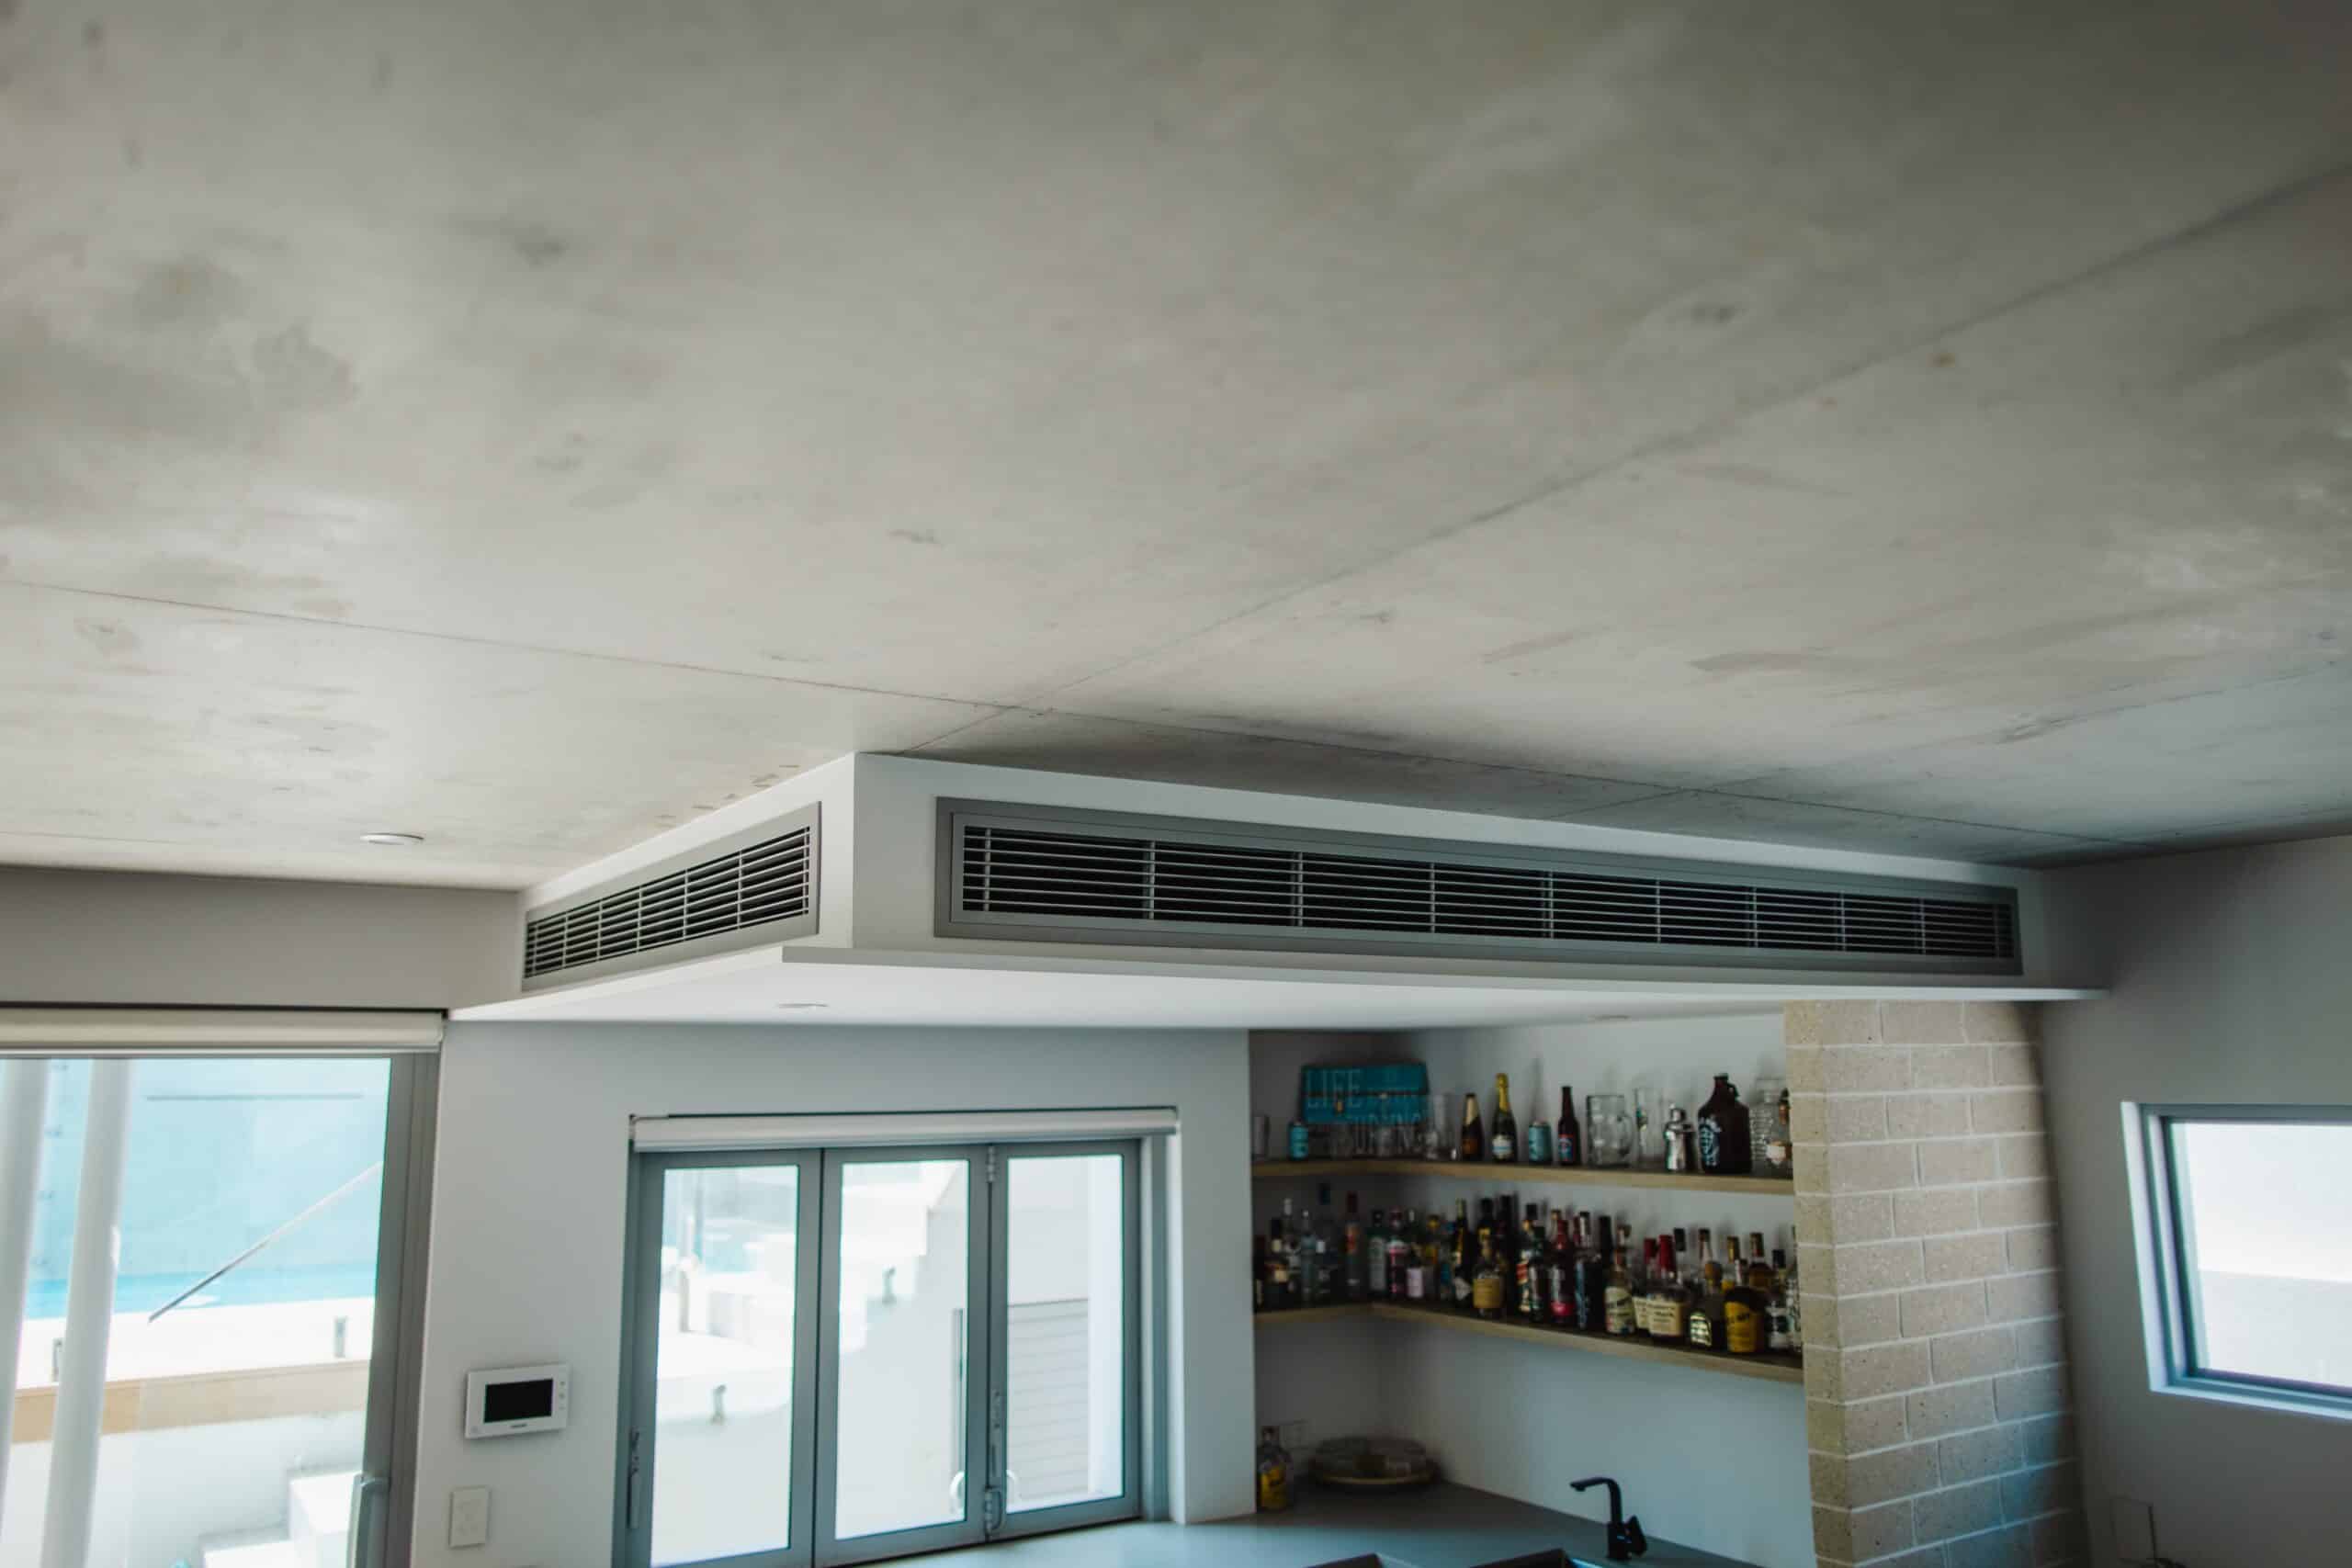 slim line ducted air conditioning unit in the roof of a Perth home.